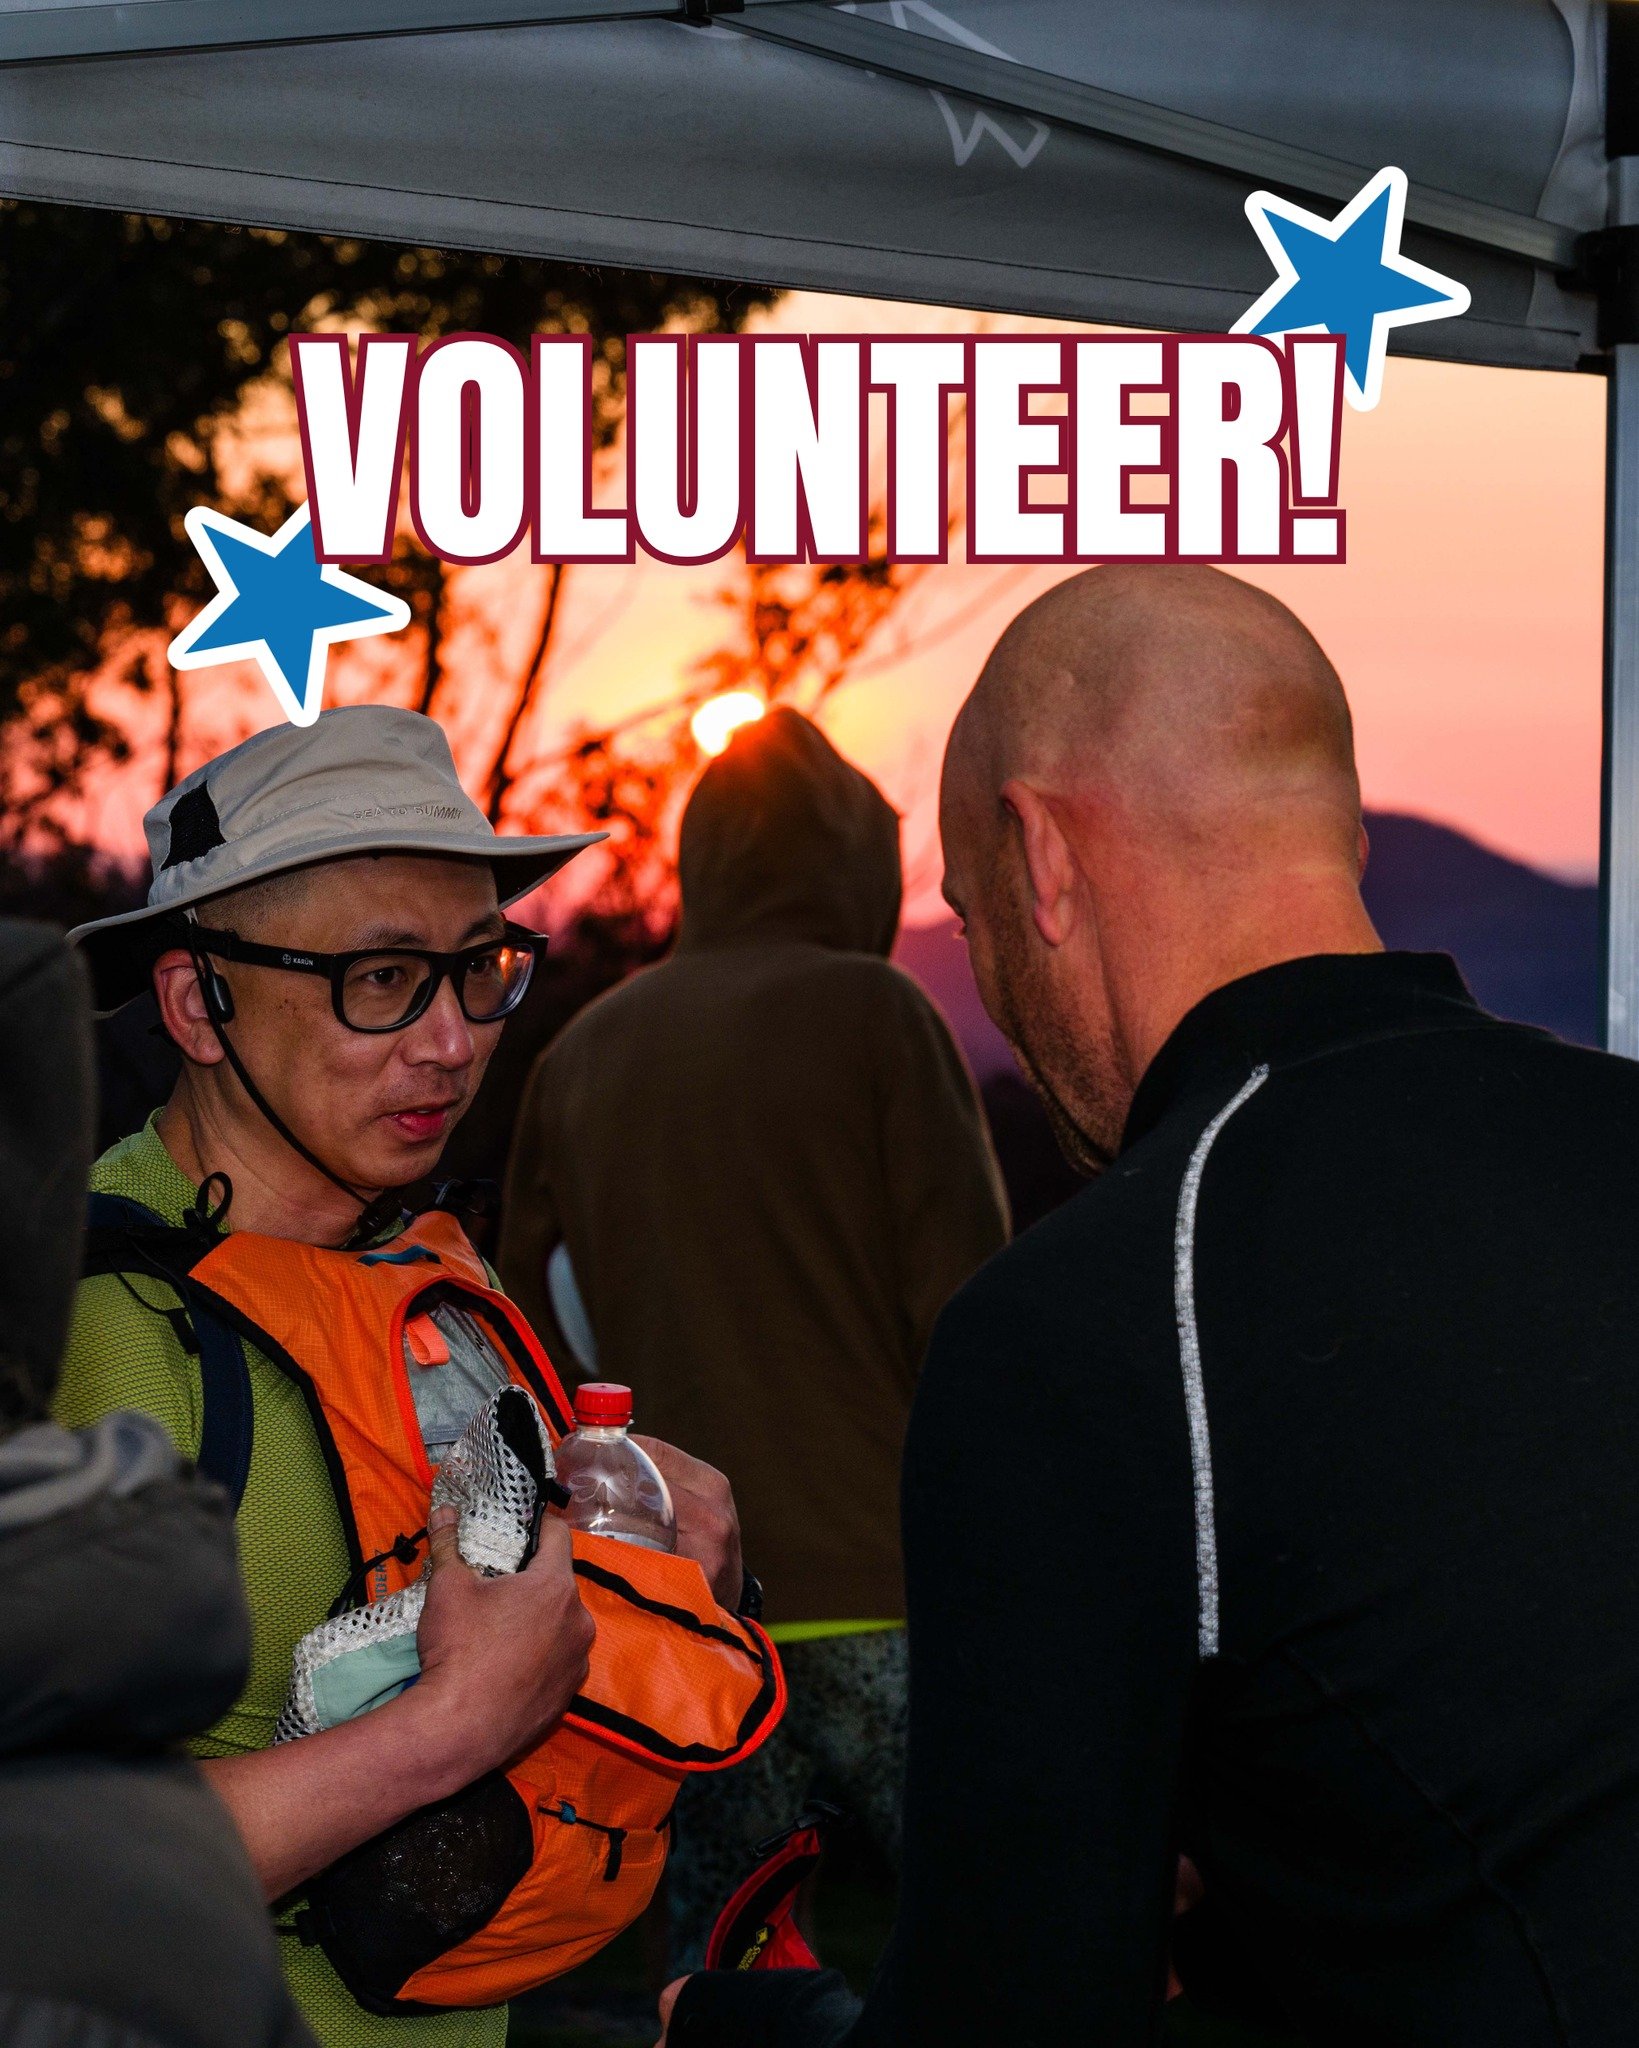 Every year, our events are only made possible through the selfless commitments of our volunteers. Do you want to give a helping hand in 2024?

ROLES
We have the following roles available over the weekend:

Course Marshals: Cheer and direct runners
Bi